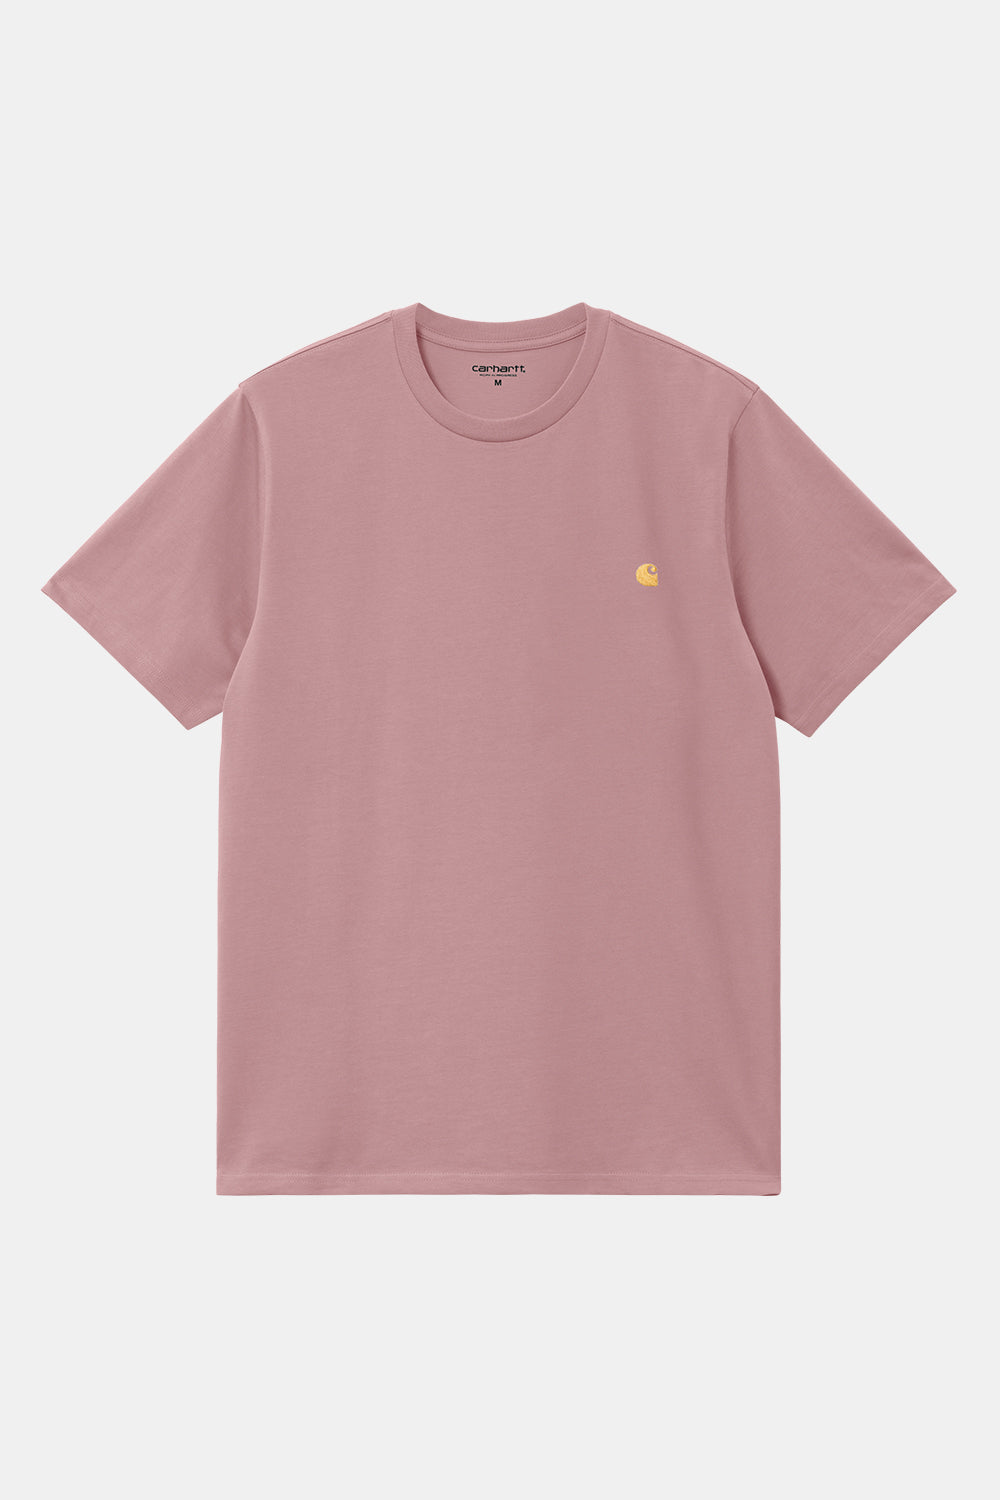 Carhartt WIP Short Sleeve Chase T-Shirt (Glassy Pink/Gold)
